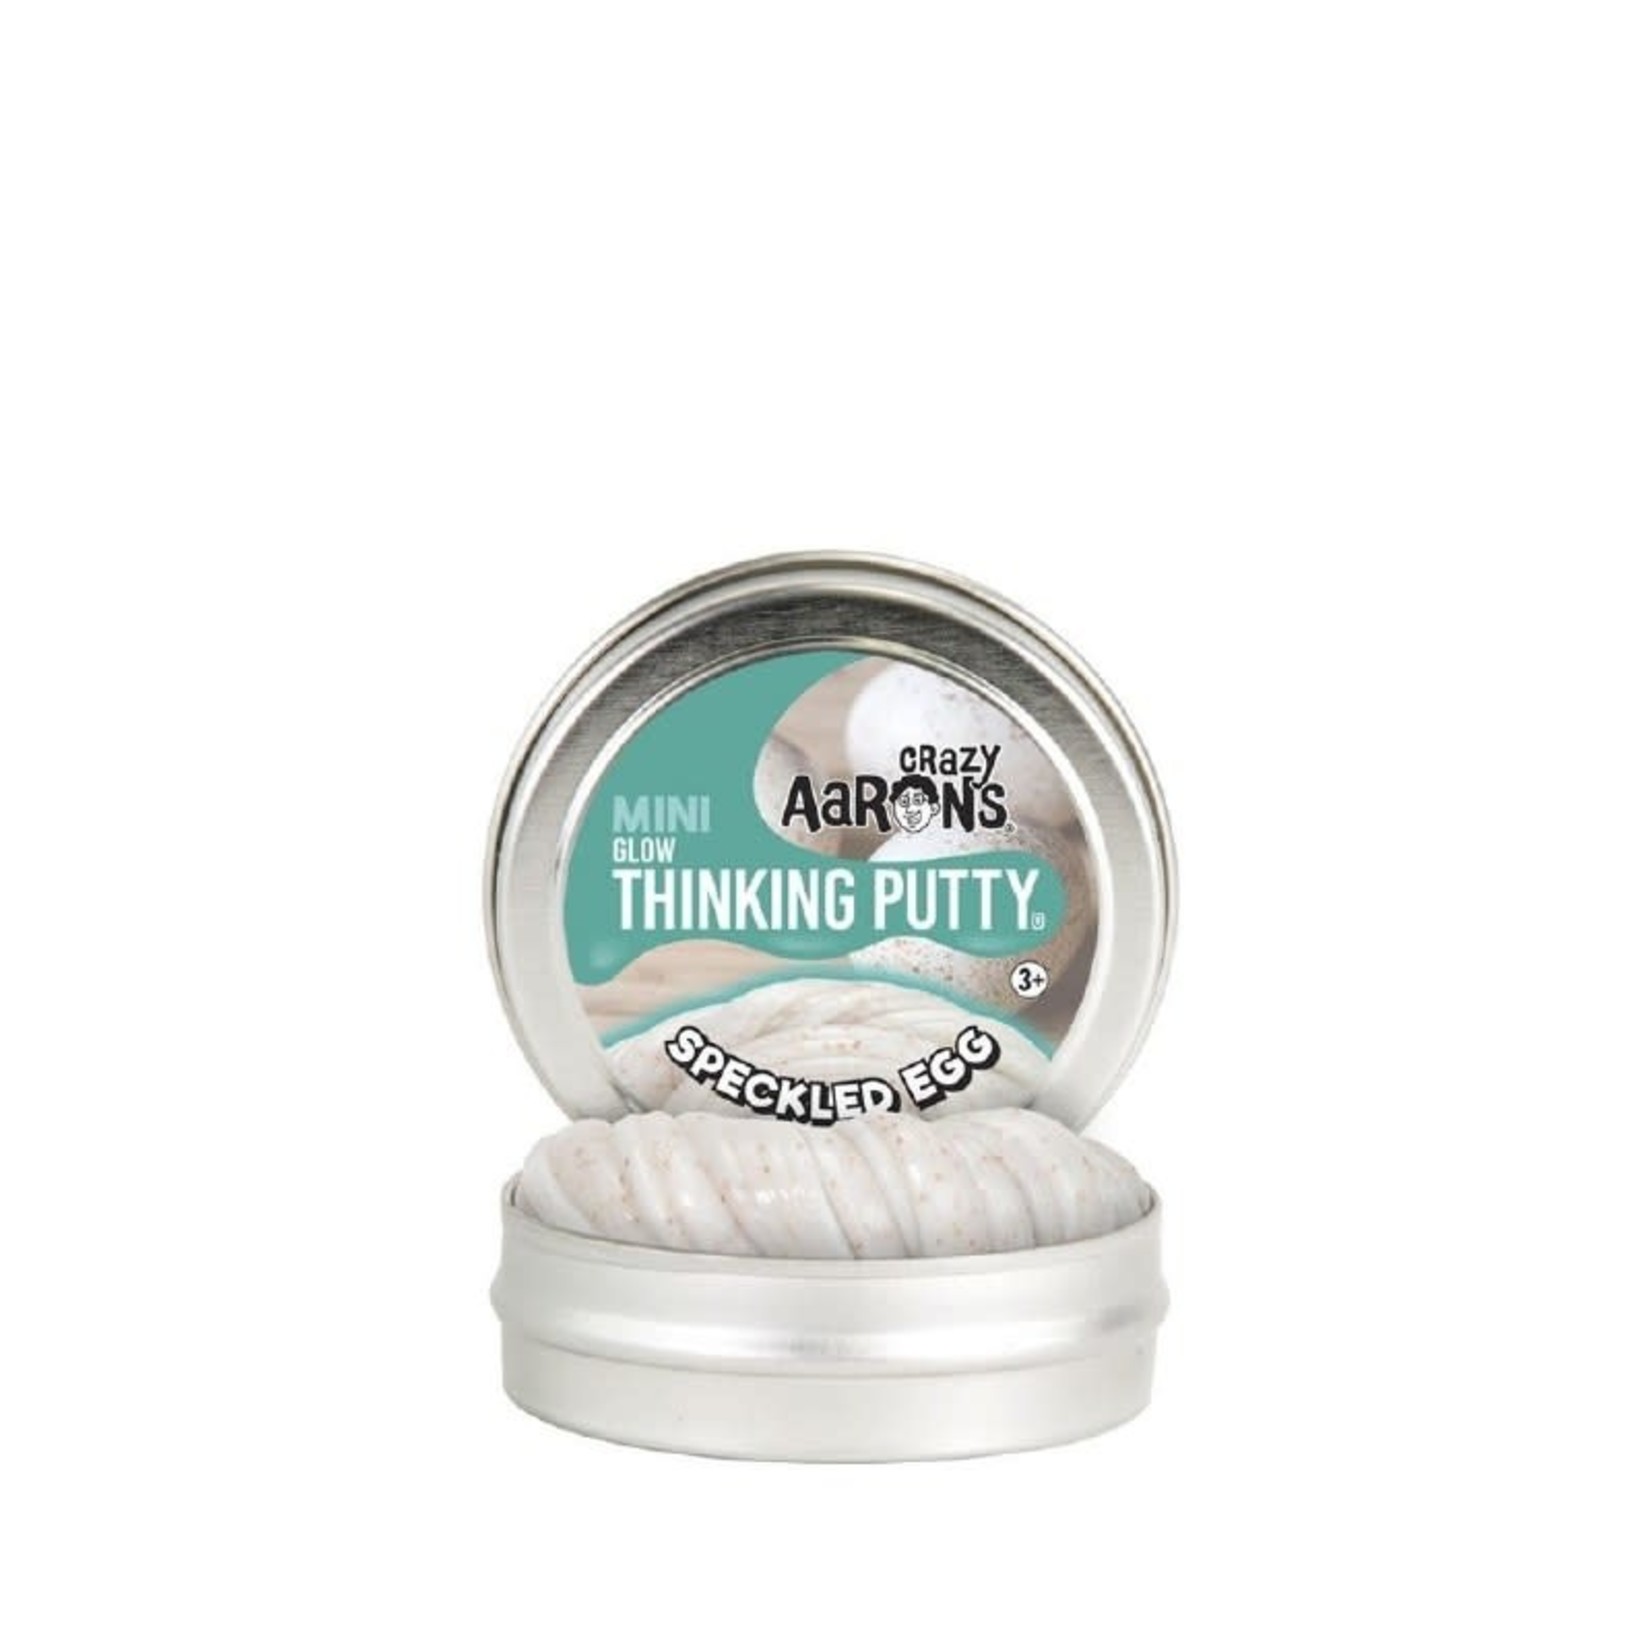 Crazy Aaron's Thinking Putty Mini Speckled Egg Thinking Putty